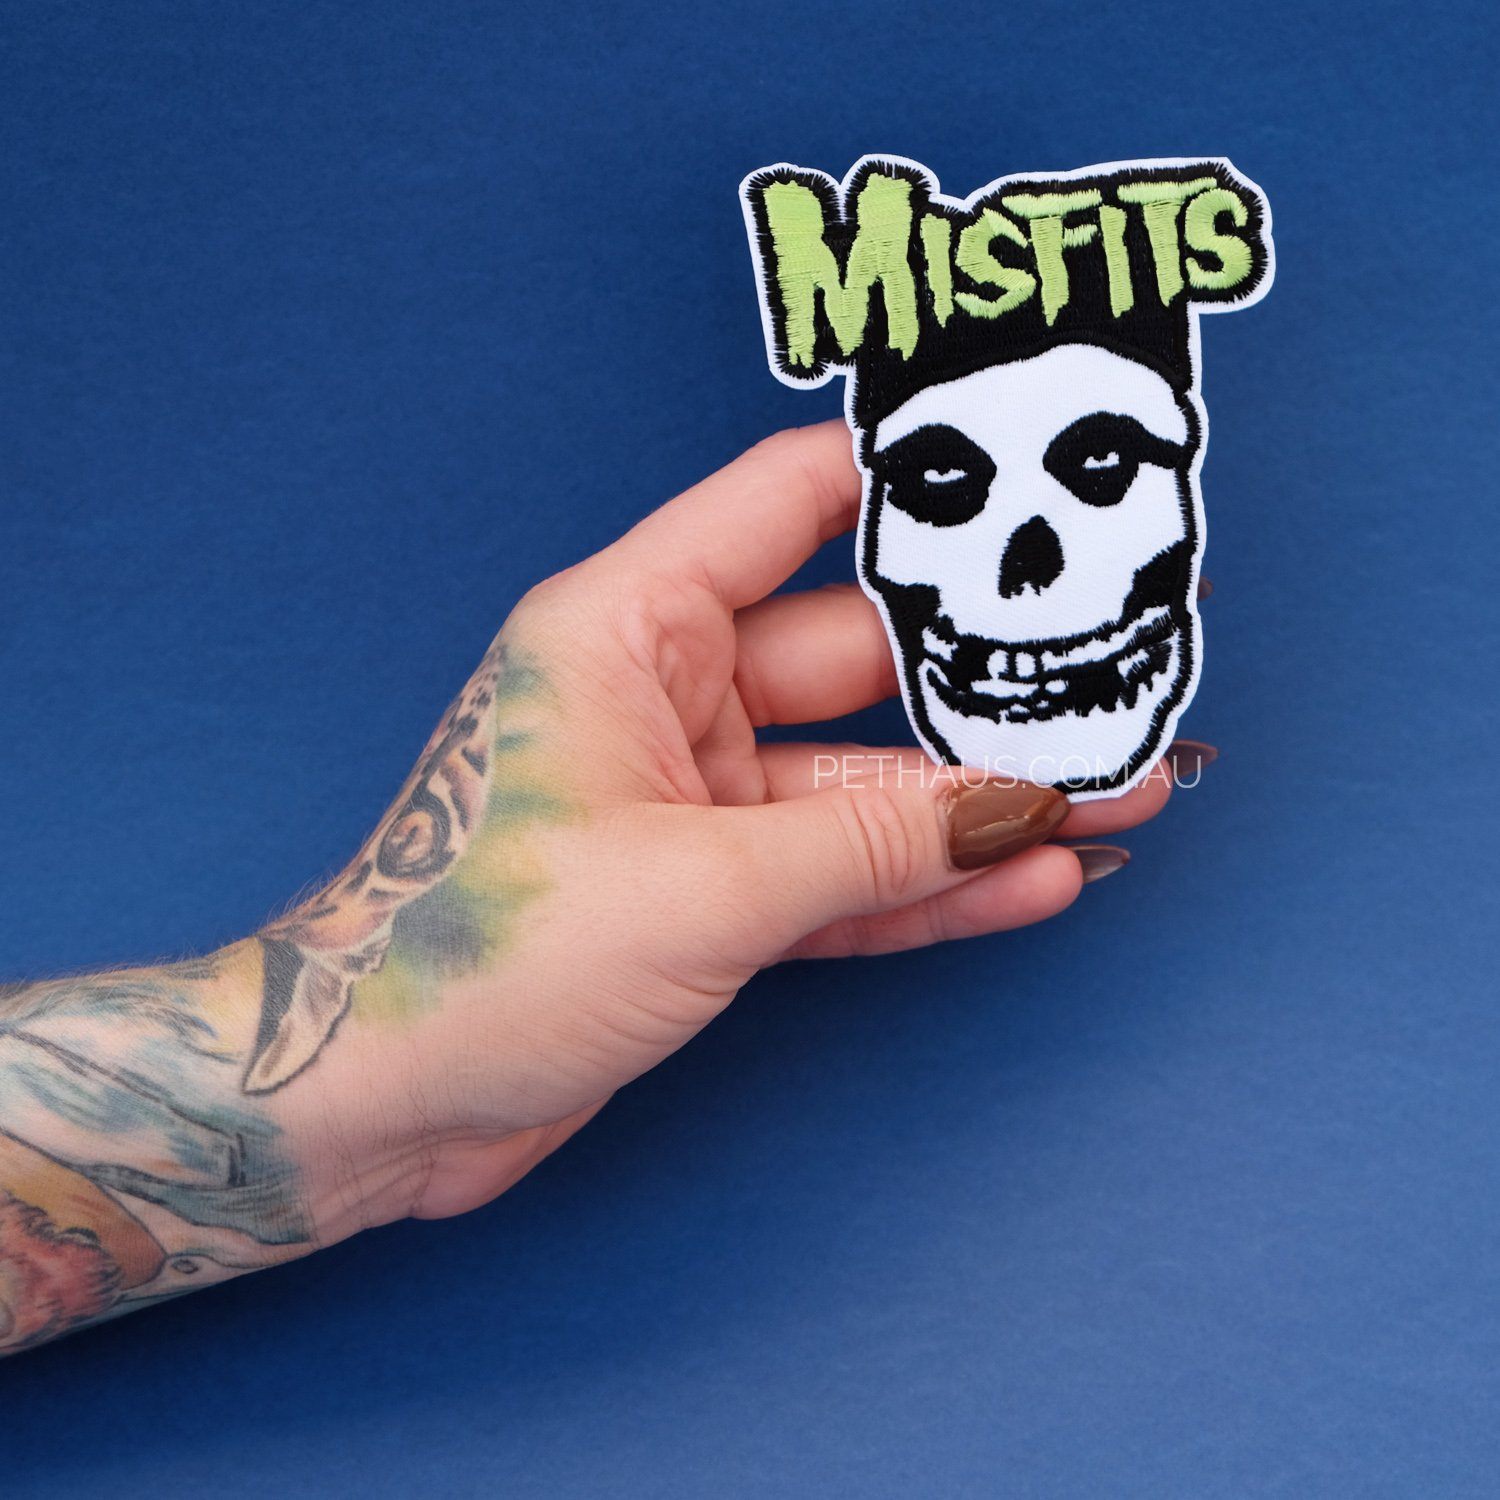 Misfits embroidered patch, band patch, punk patch, rock patch